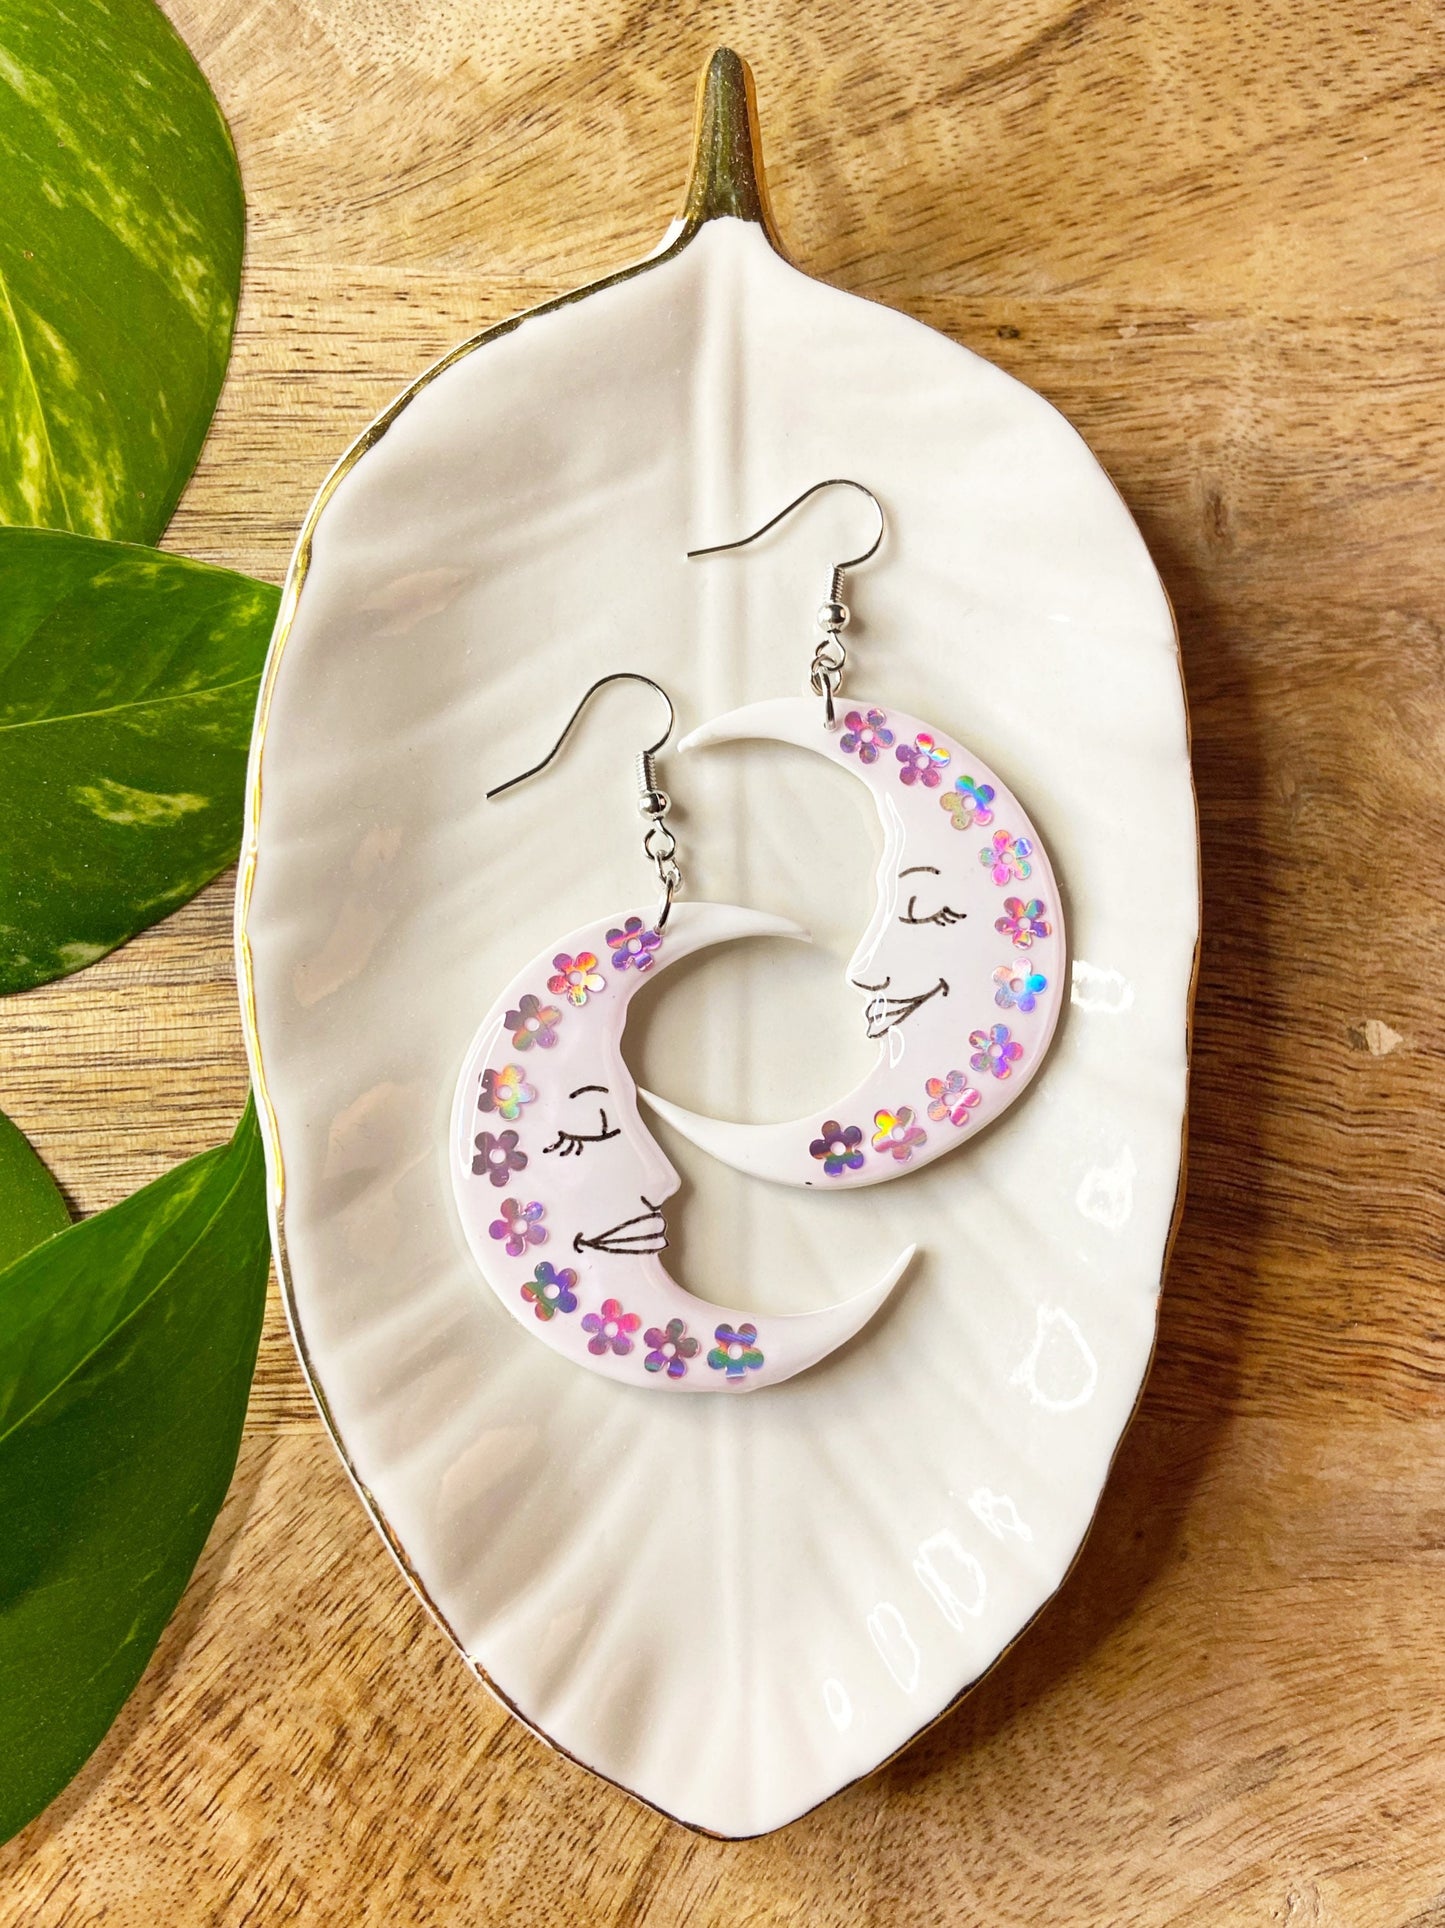 Sleepy Moons- white celestial crescent moon earrings with purple holographic flowers